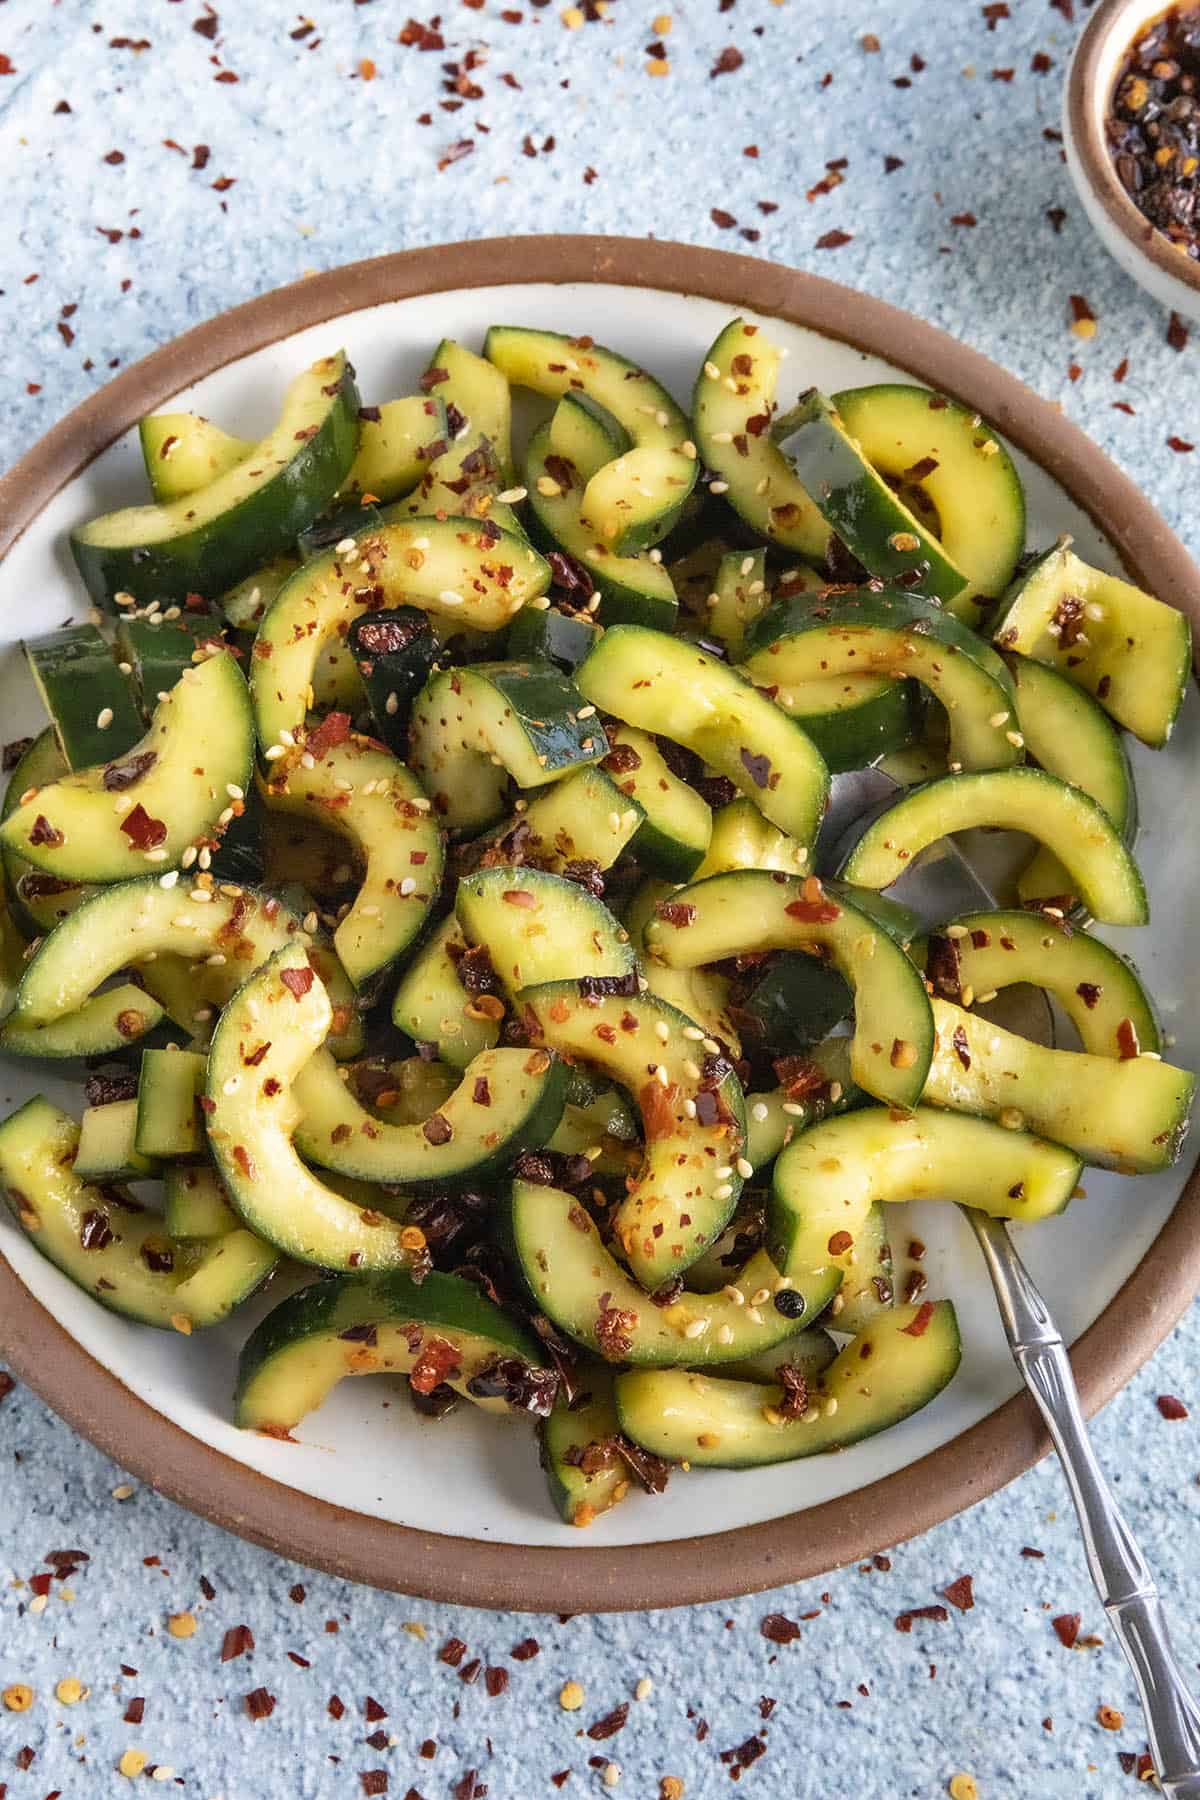 Sichuan Spiced Cucumber Salad with lots of dressing